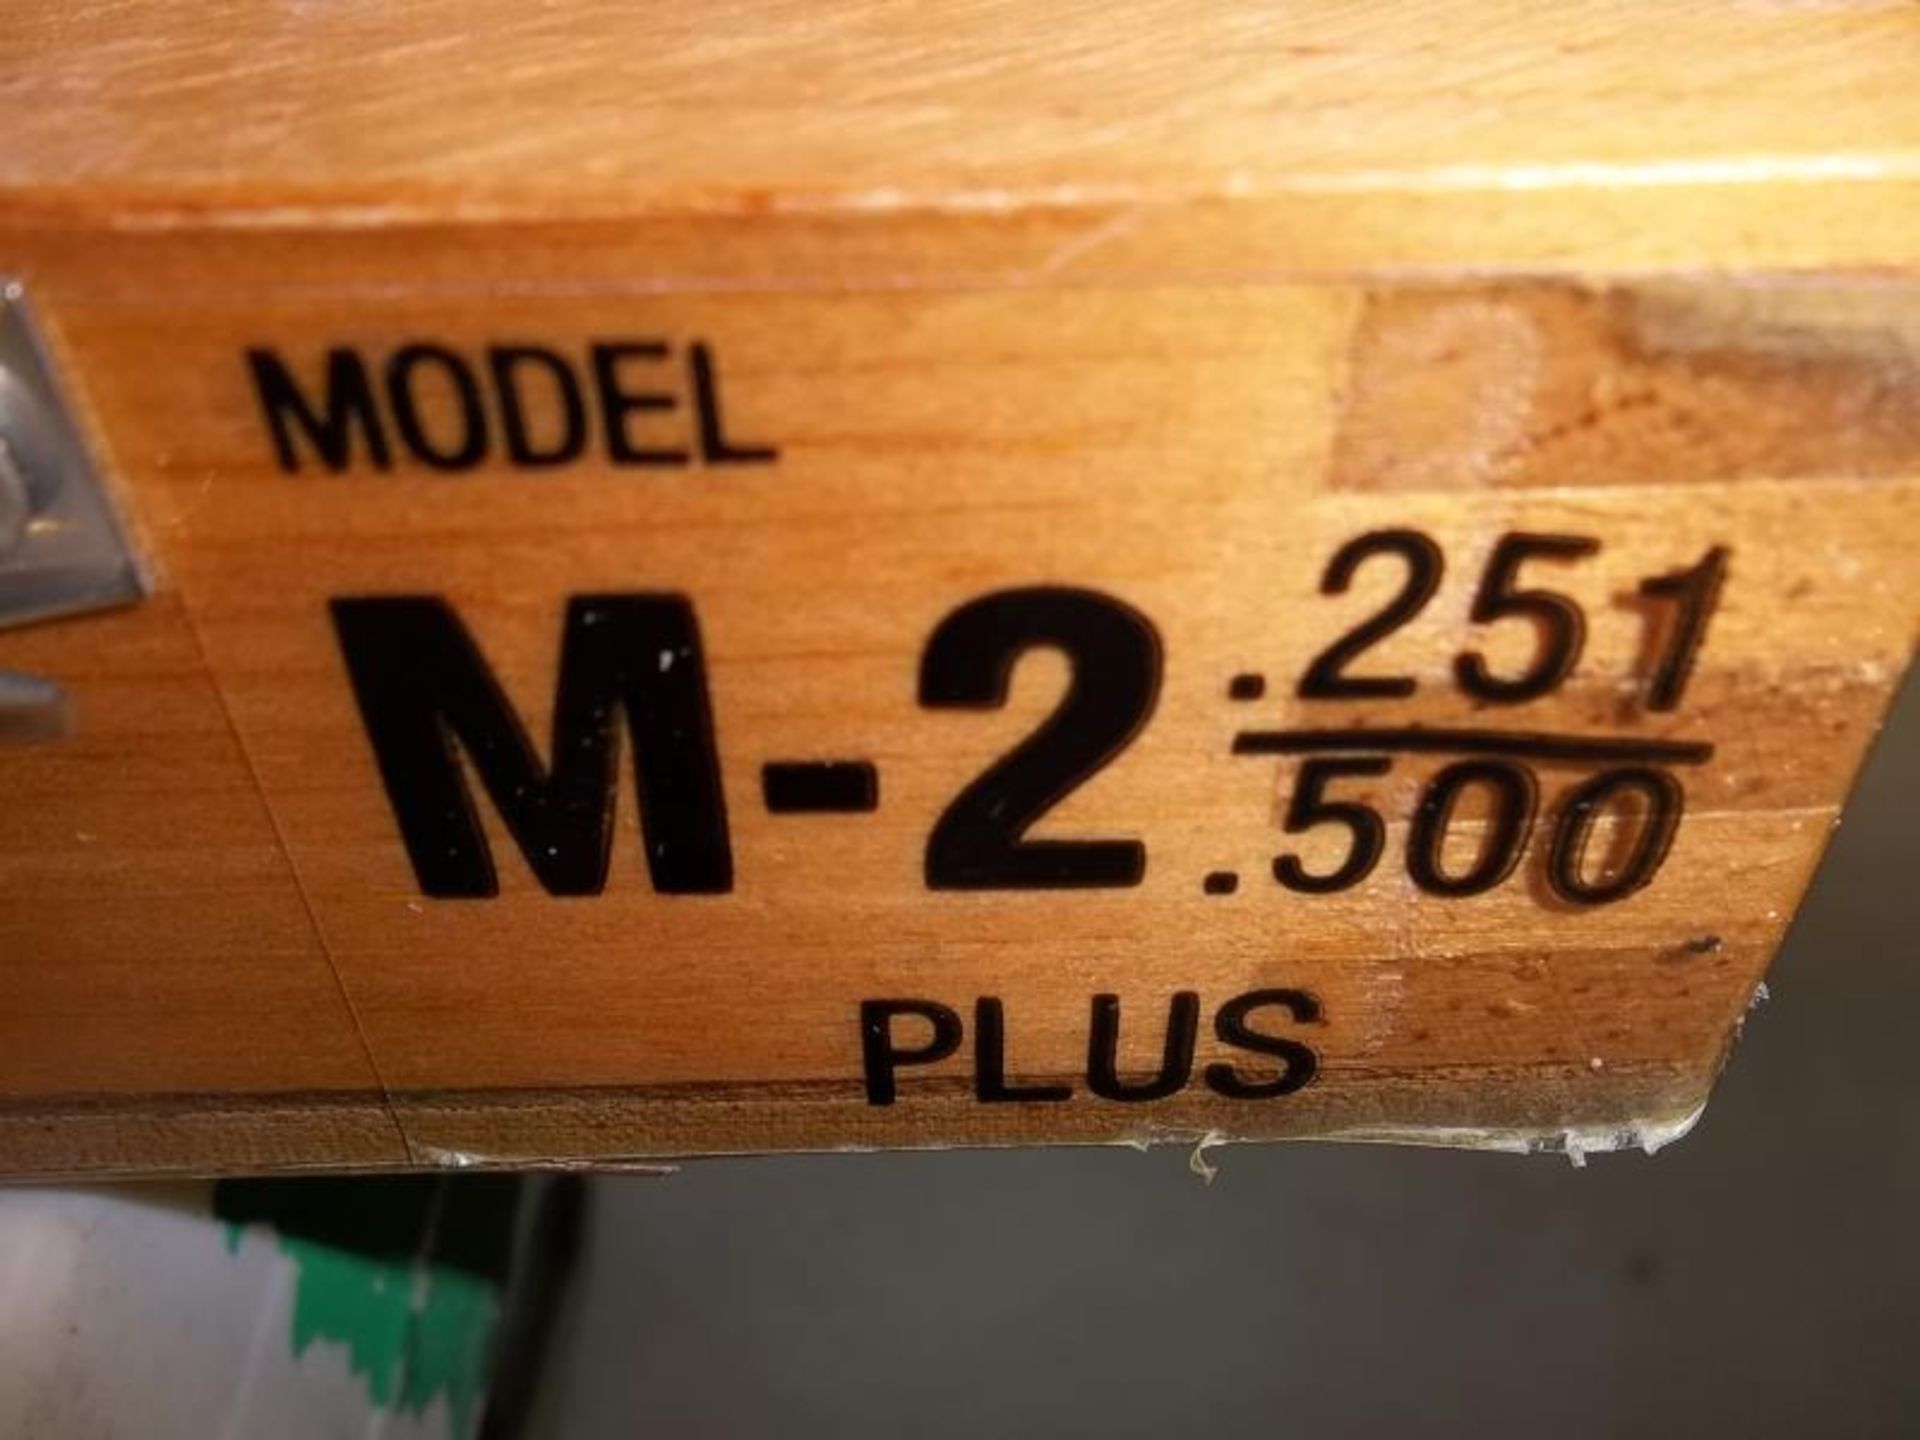 Meyer gage pin set, Model M-2, 0.251" - 0.500", complete, in case - Image 2 of 3